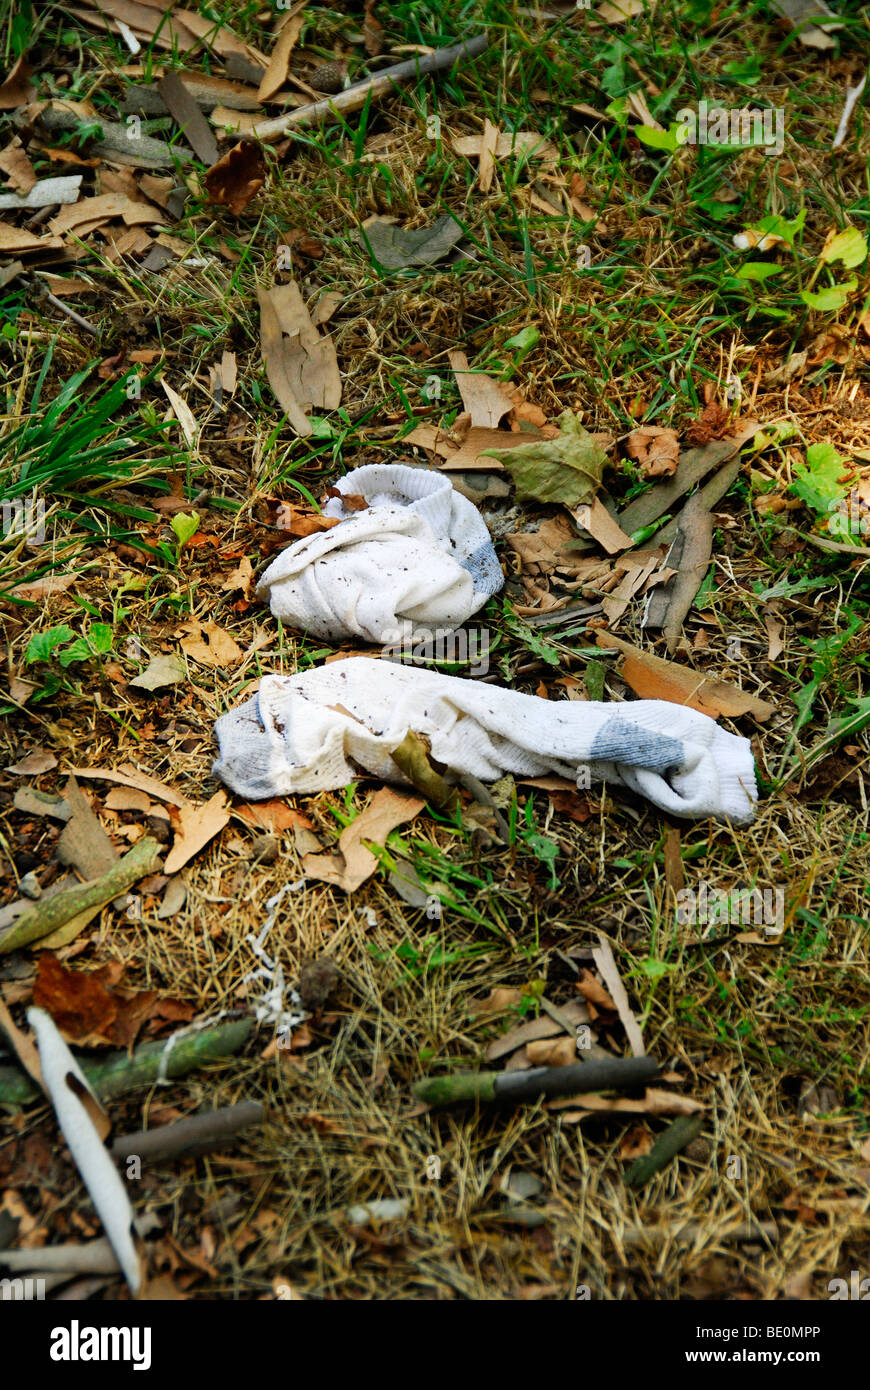 pair of socks old wet dirty and left behind Stock Photo